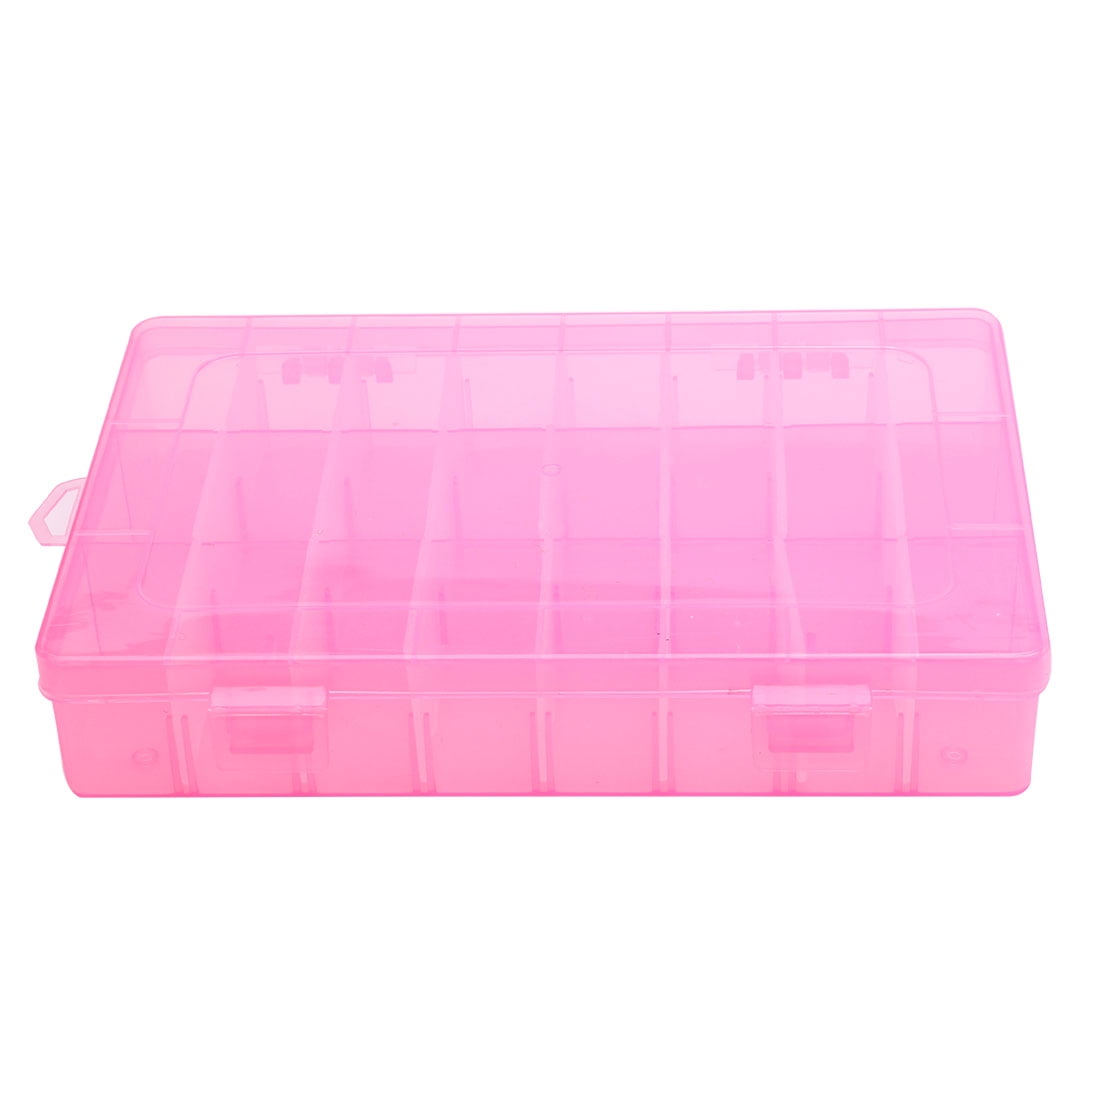 Bargain storage container dividers